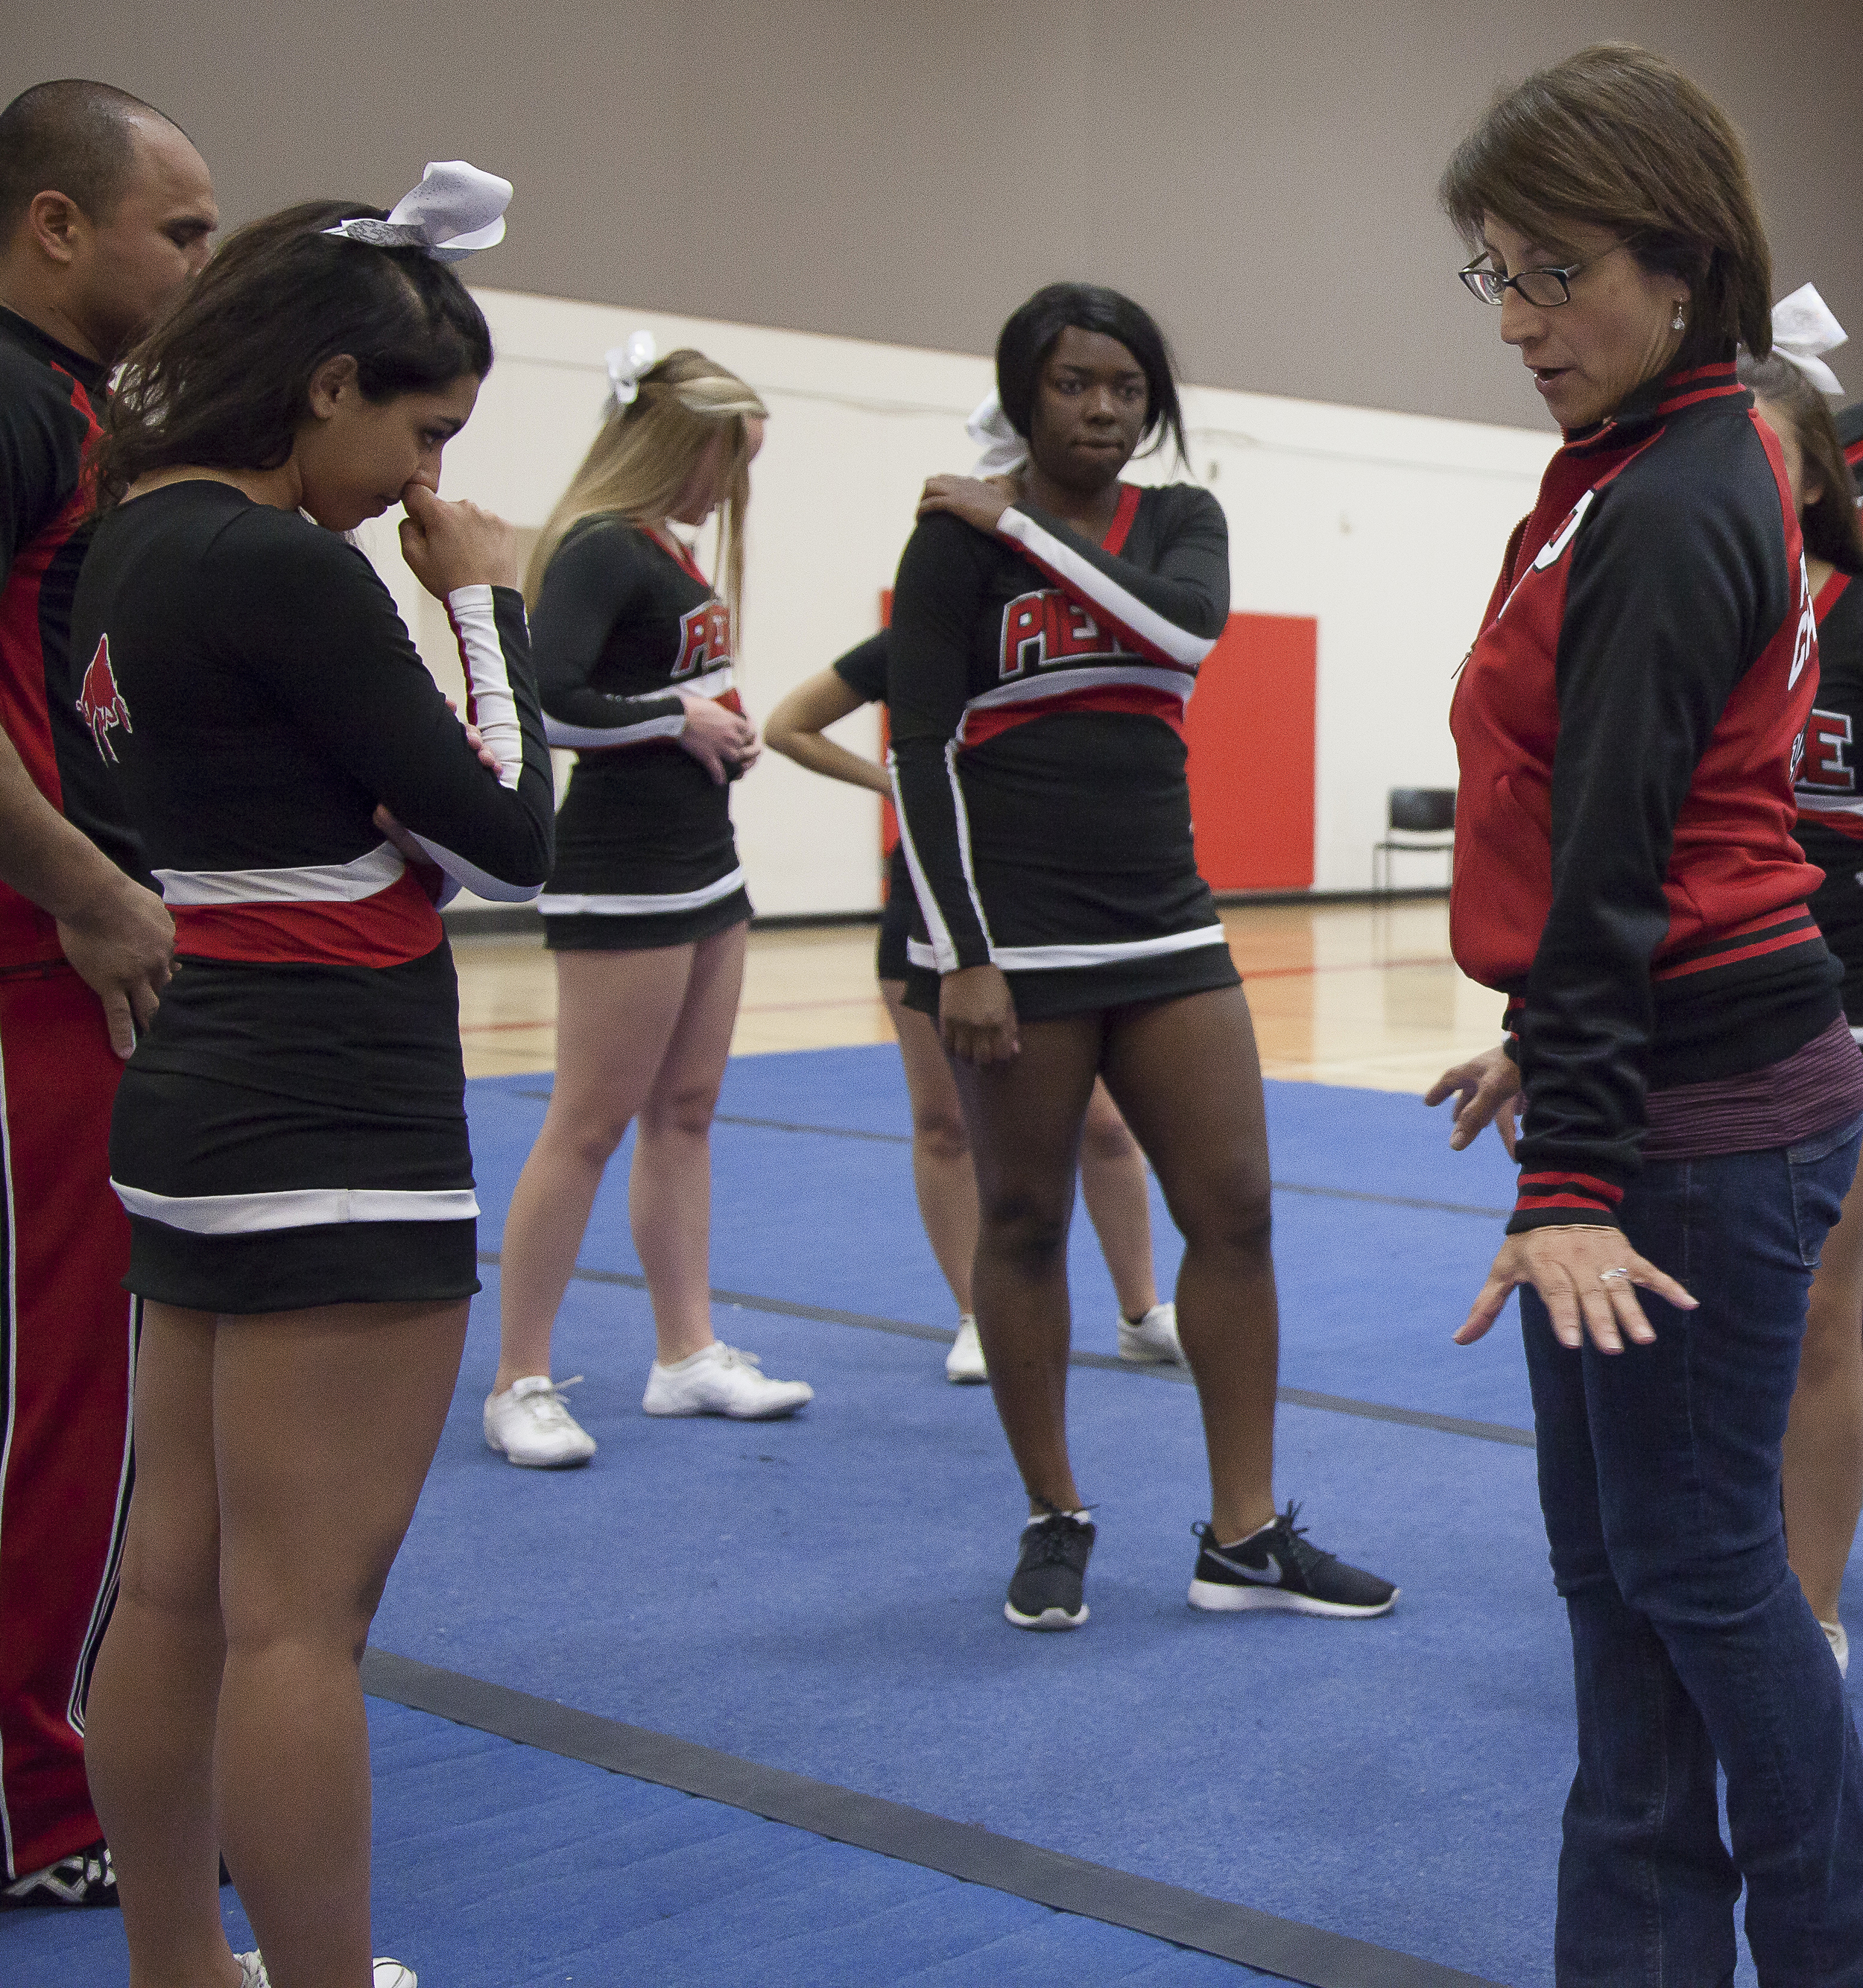  Coach Jenny Ghiglia goes over the routine while team members look on during a practice session in the North Gym on Sunday March 1, 2015. Woodland Hills, Calif.  Read the full story&nbsp; here  